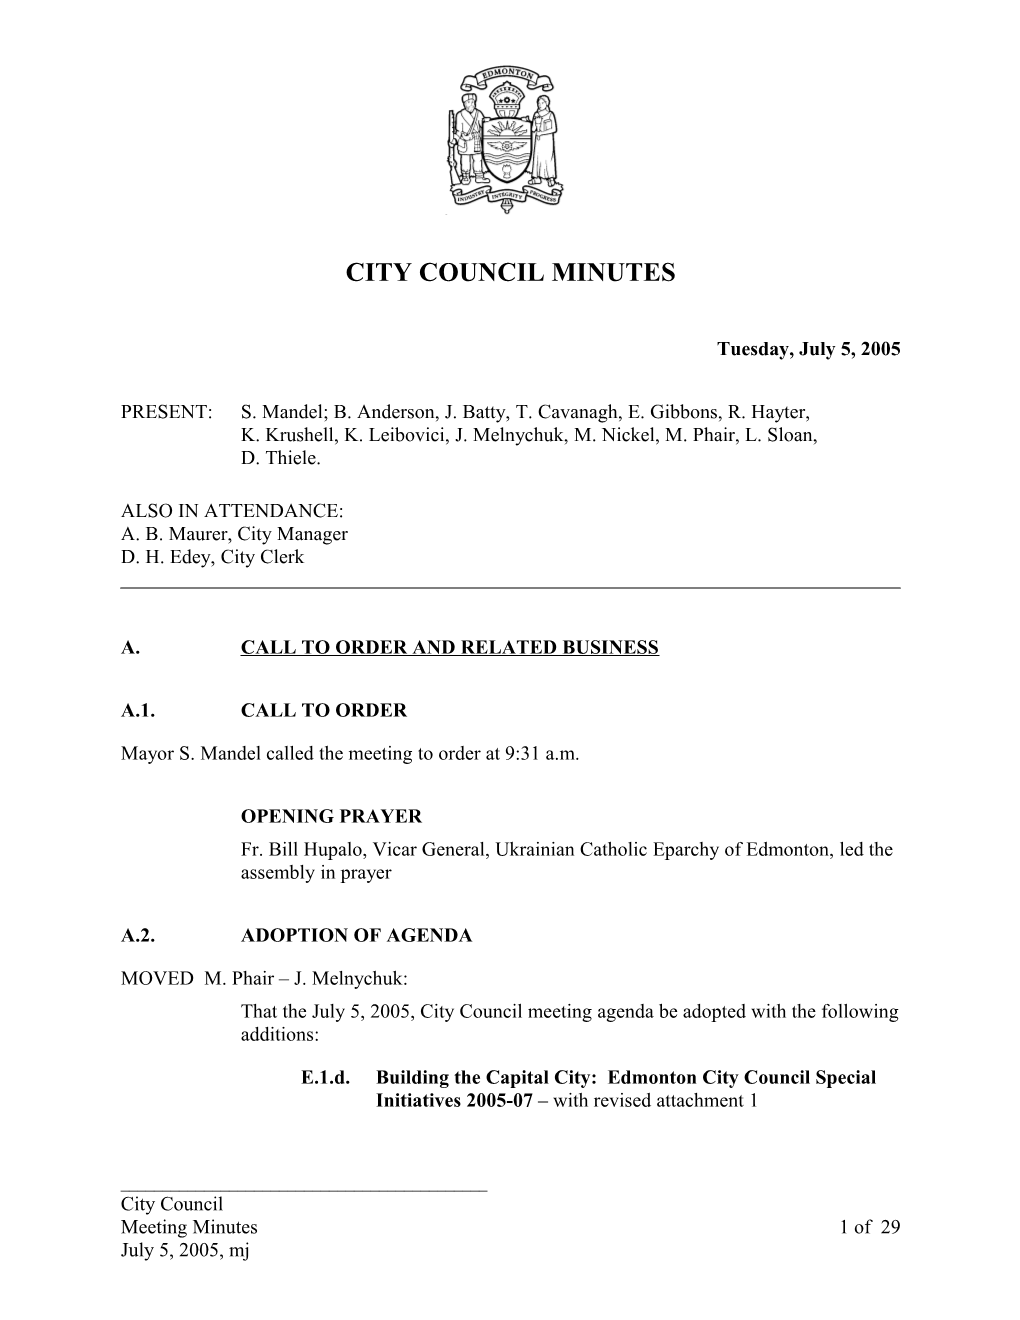 Minutes for City Council July 5, 2005 Meeting